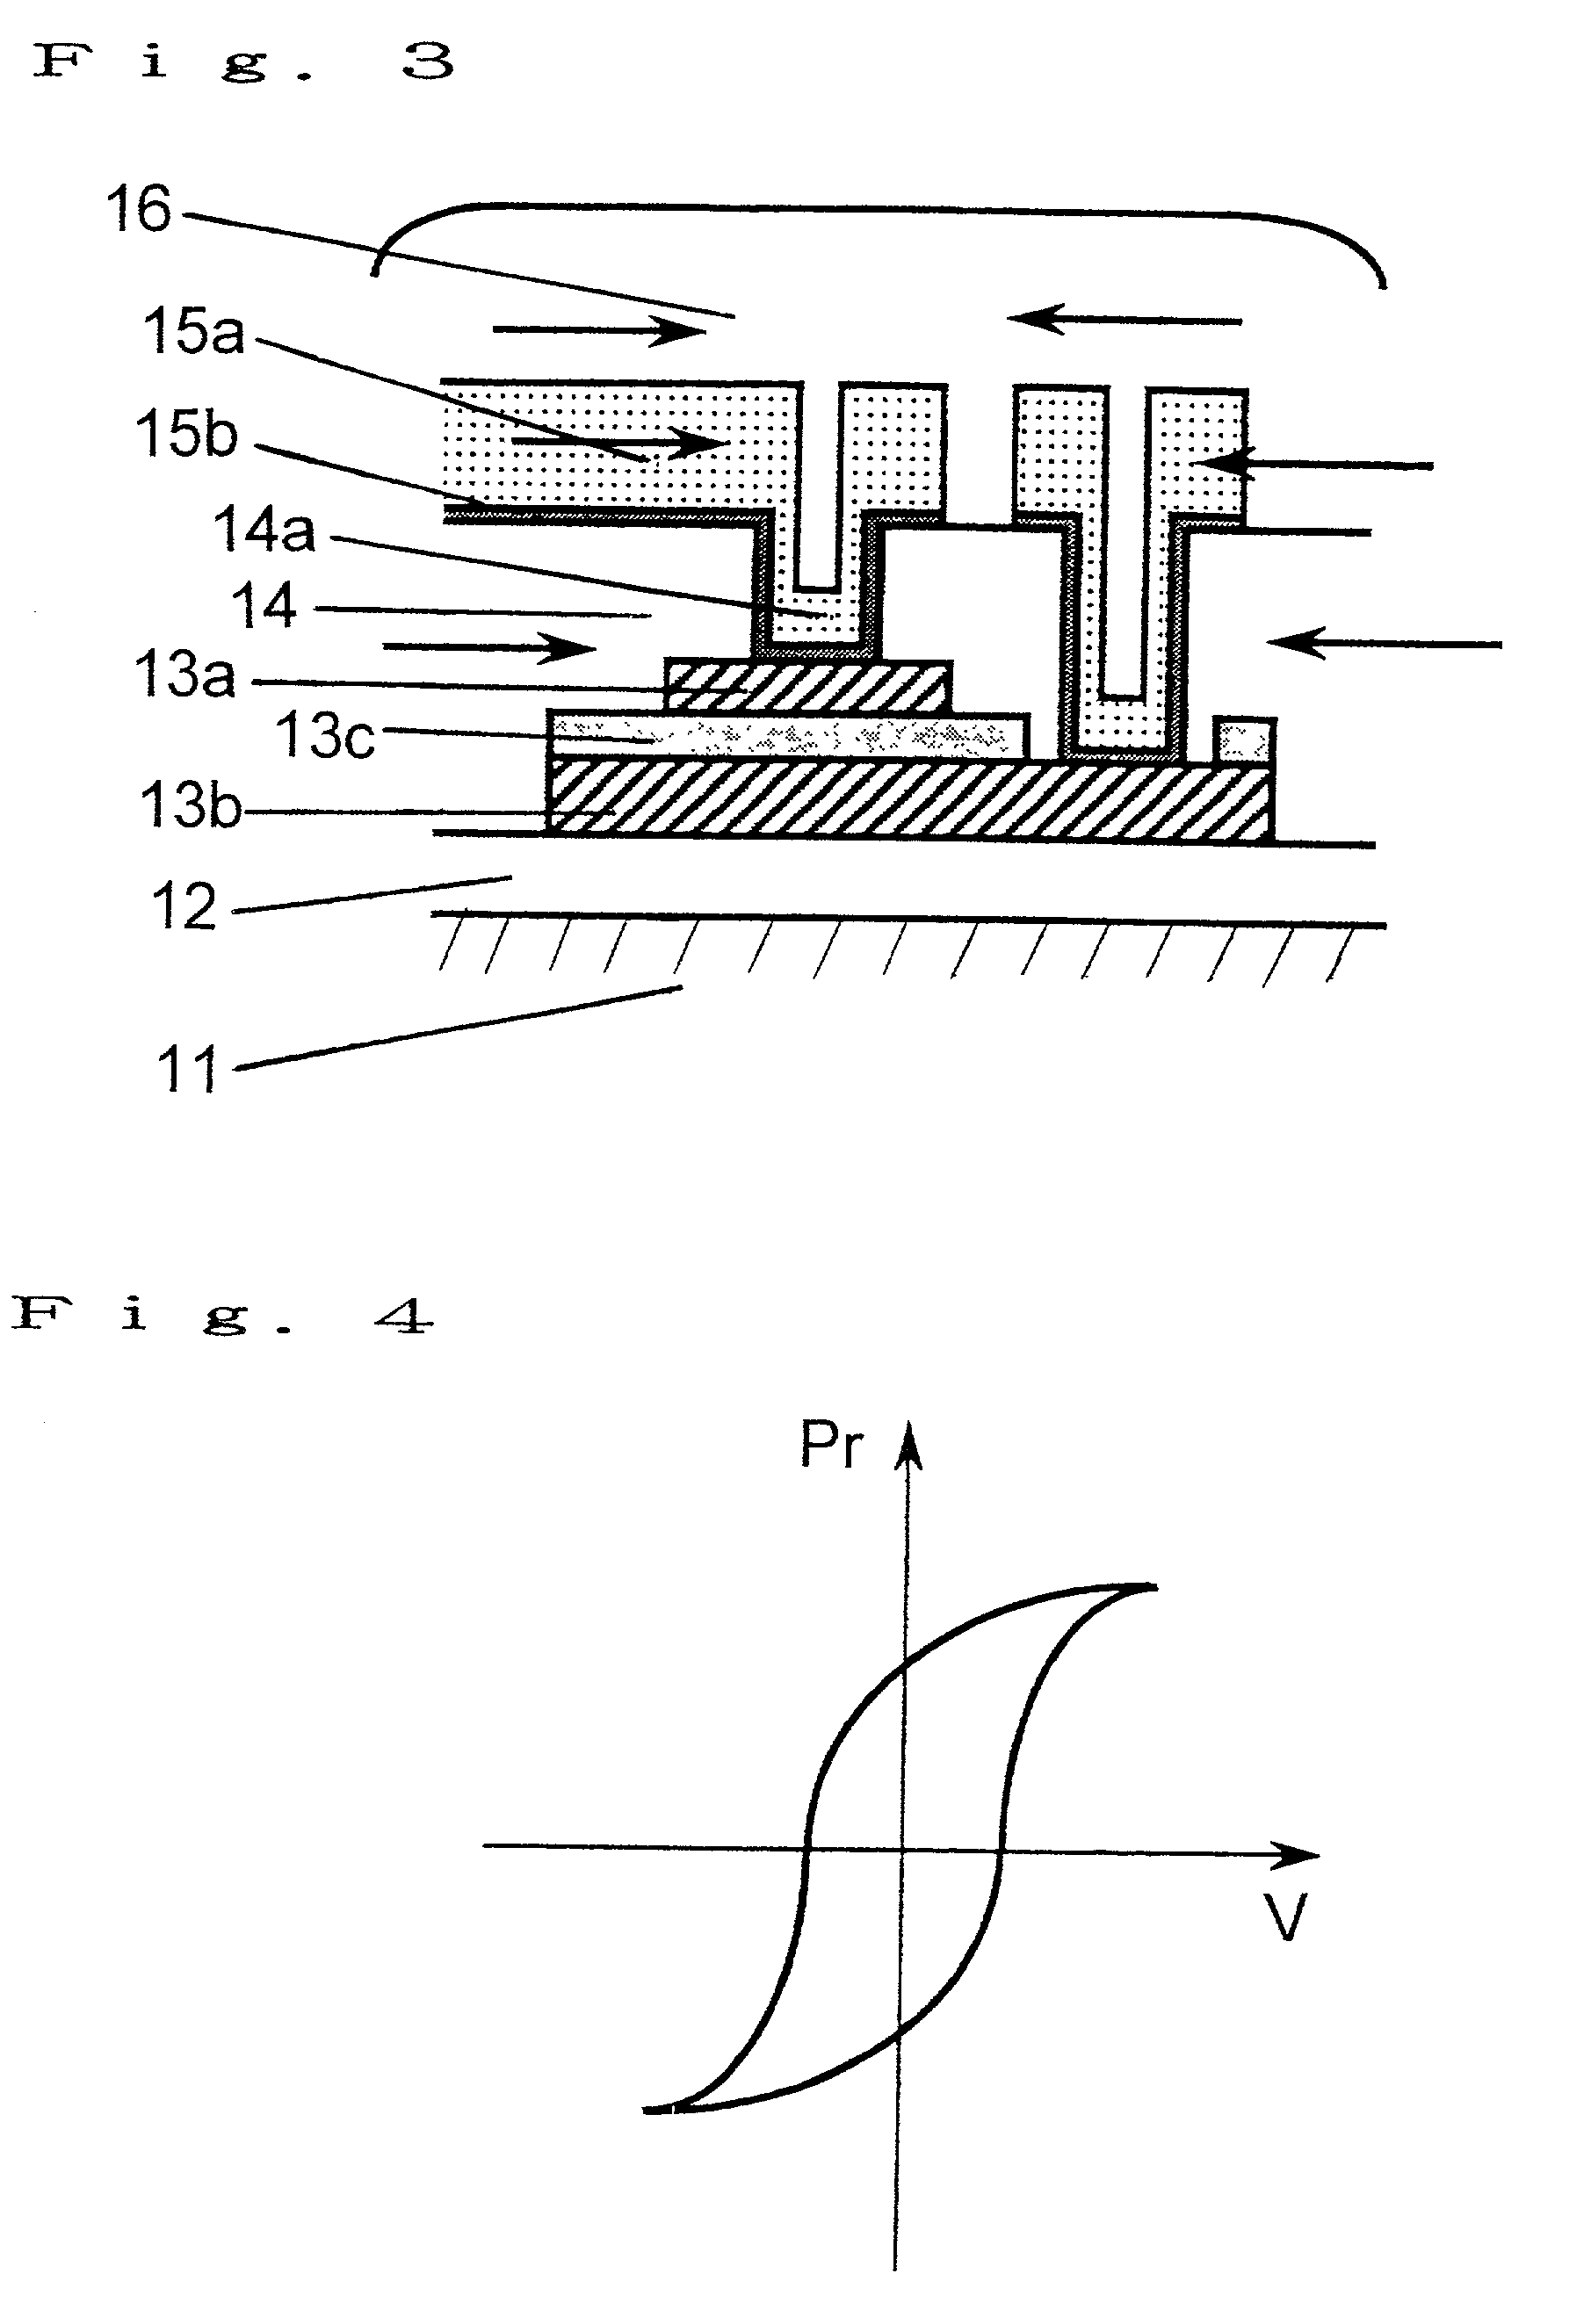 Semiconductor device having a ferroelectric capacitor with tensile stress properties